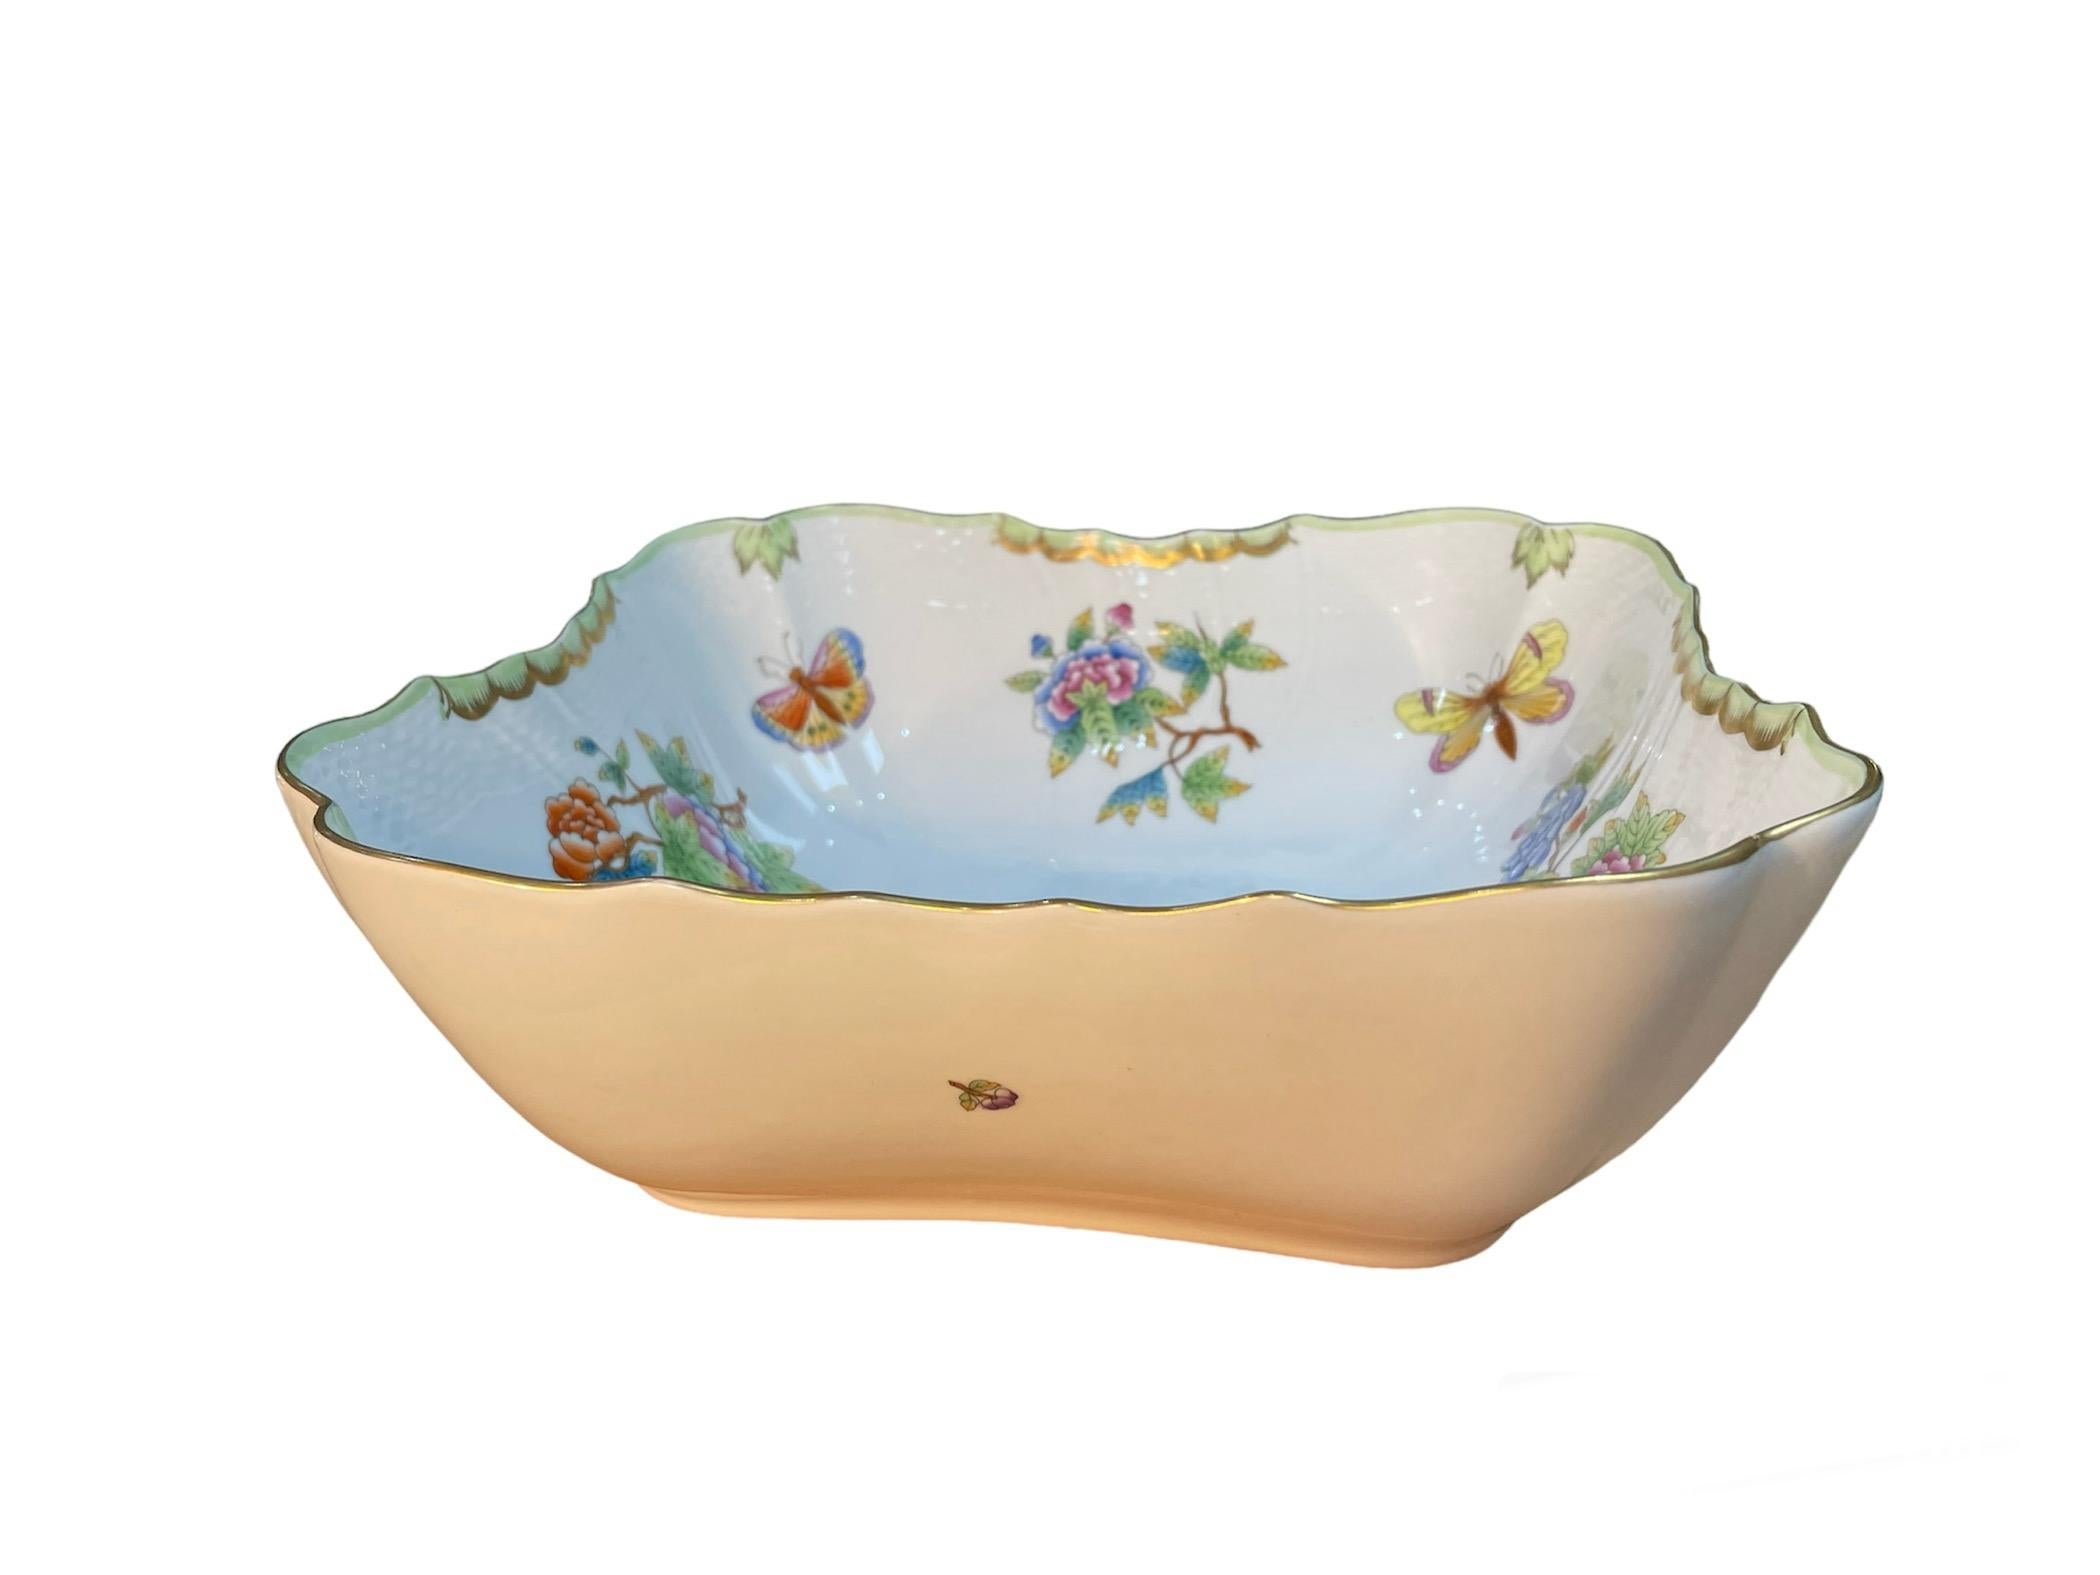 Hungarian Herend Porcelain Queen Victoria Pattern Salad Bowl For Sale